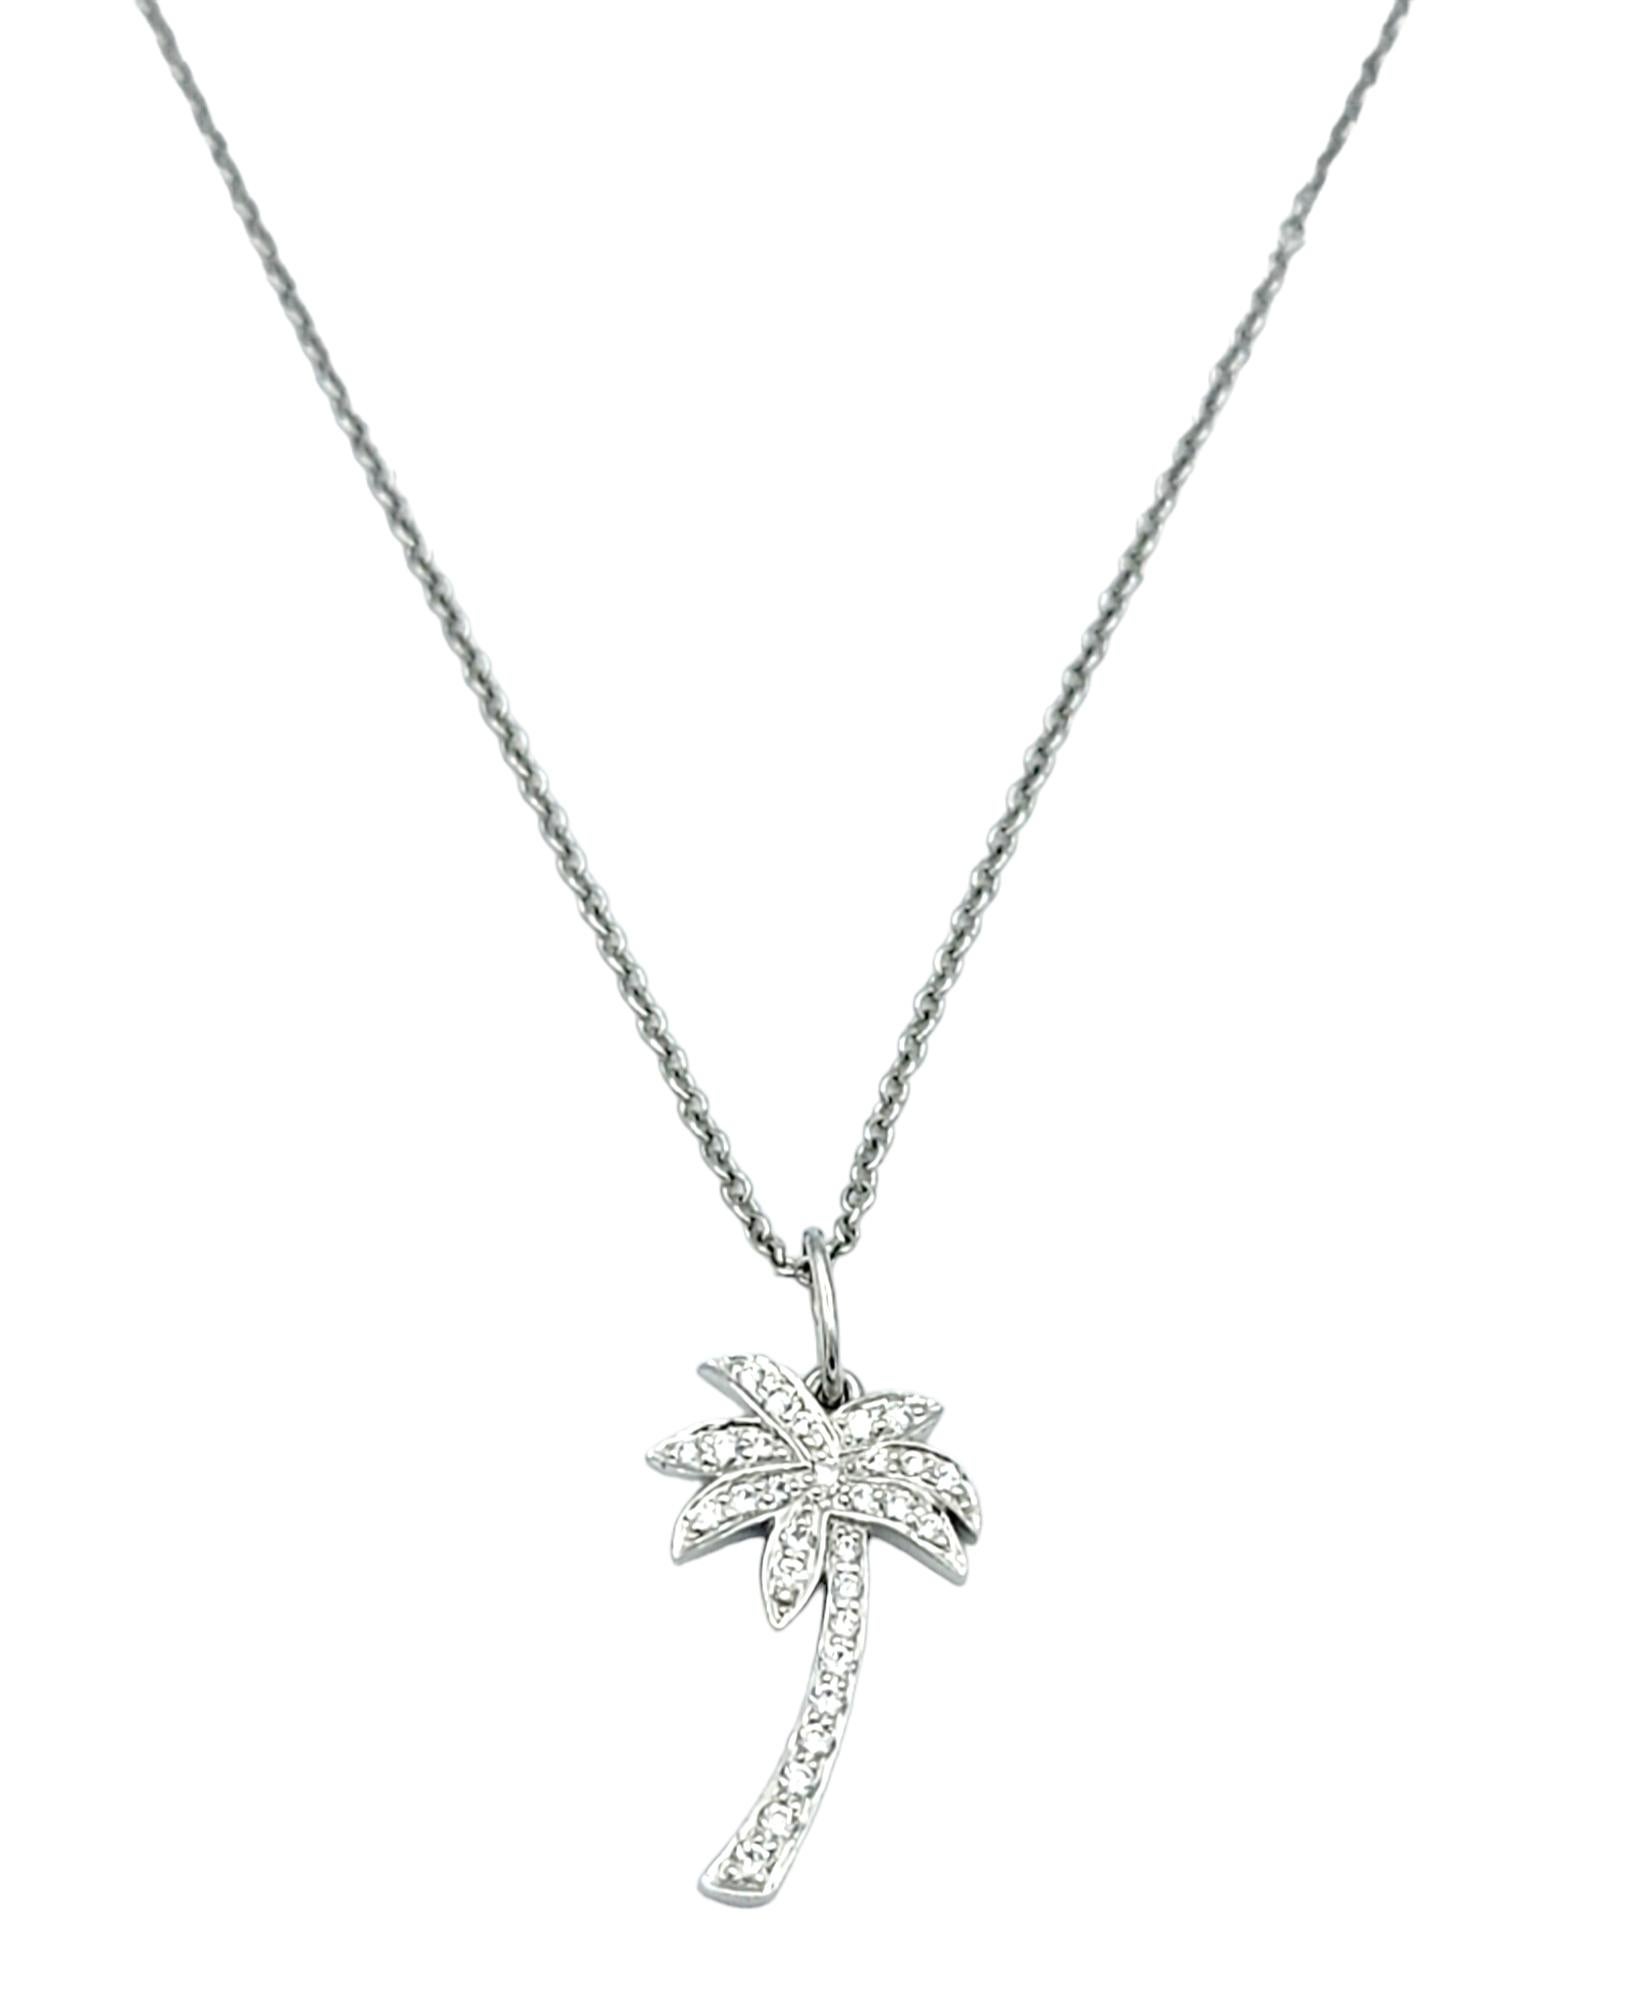 This Tiffany & Co. pendant necklace, crafted in platinum, is a sublime expression of refined luxury. The pendant features a small palm tree intricately adorned with diamonds, creating a dazzling and whimsical representation of nature. The meticulous